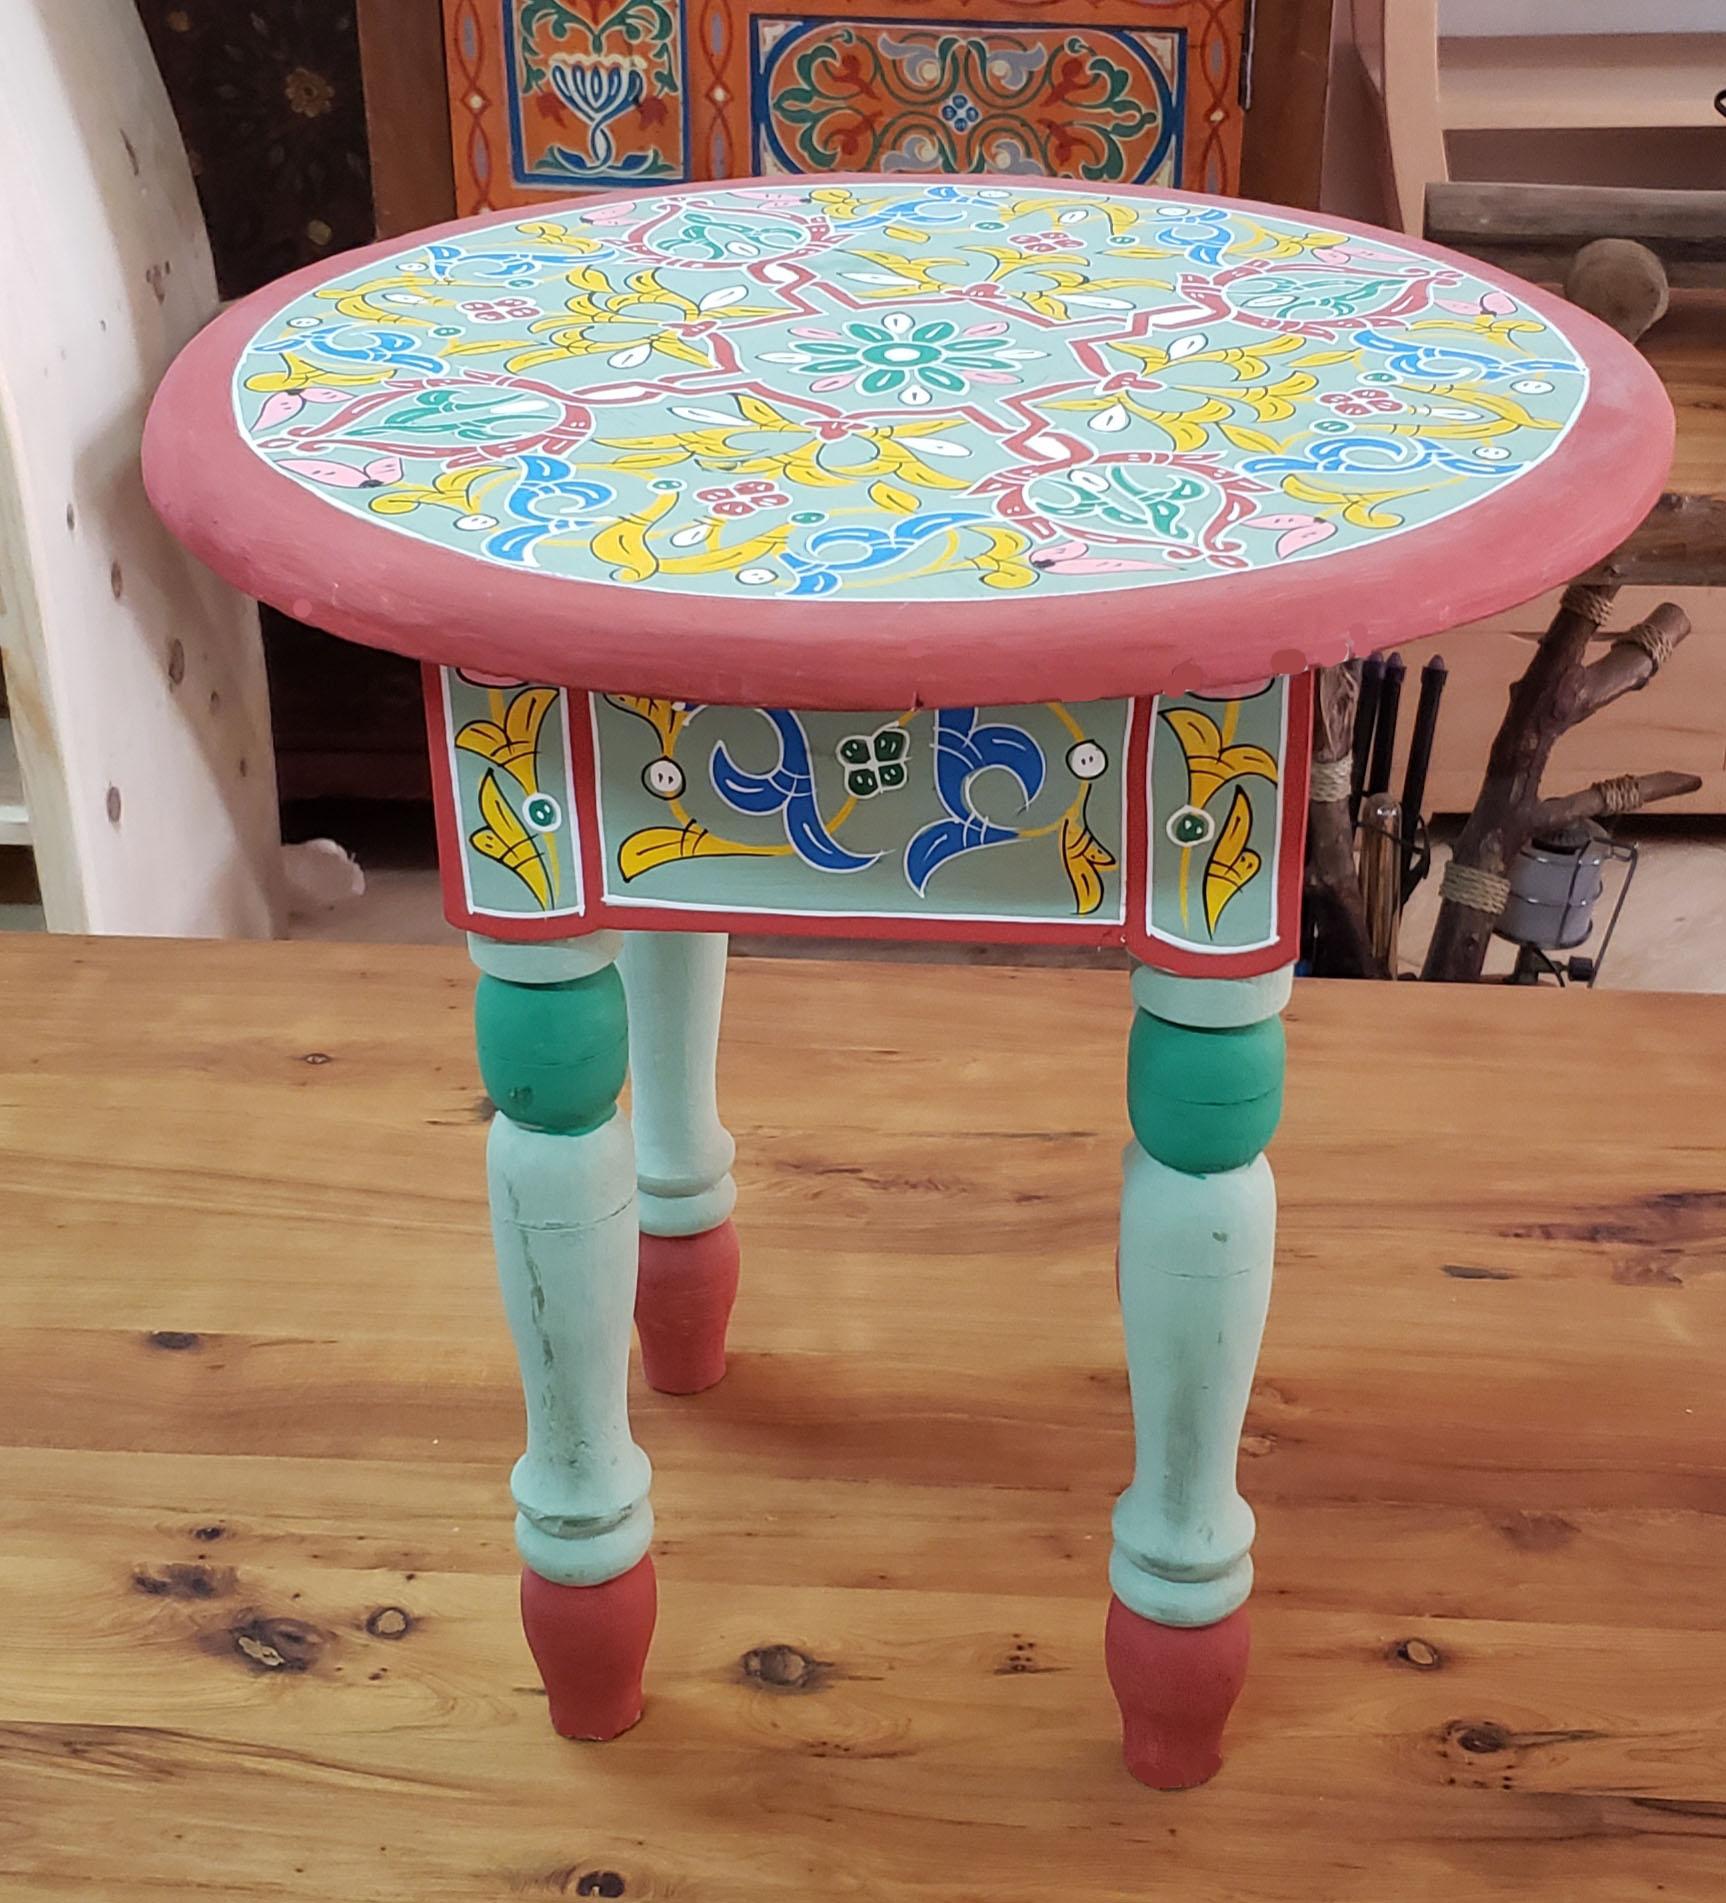 This is a 100% hand painted and hand carved Moroccan round shape side table or end table. Great handcraftsmanship throughout, featuring the famous Moroccan Zouak work. Beautiful add-on to your home or office decor. This table measures approximately